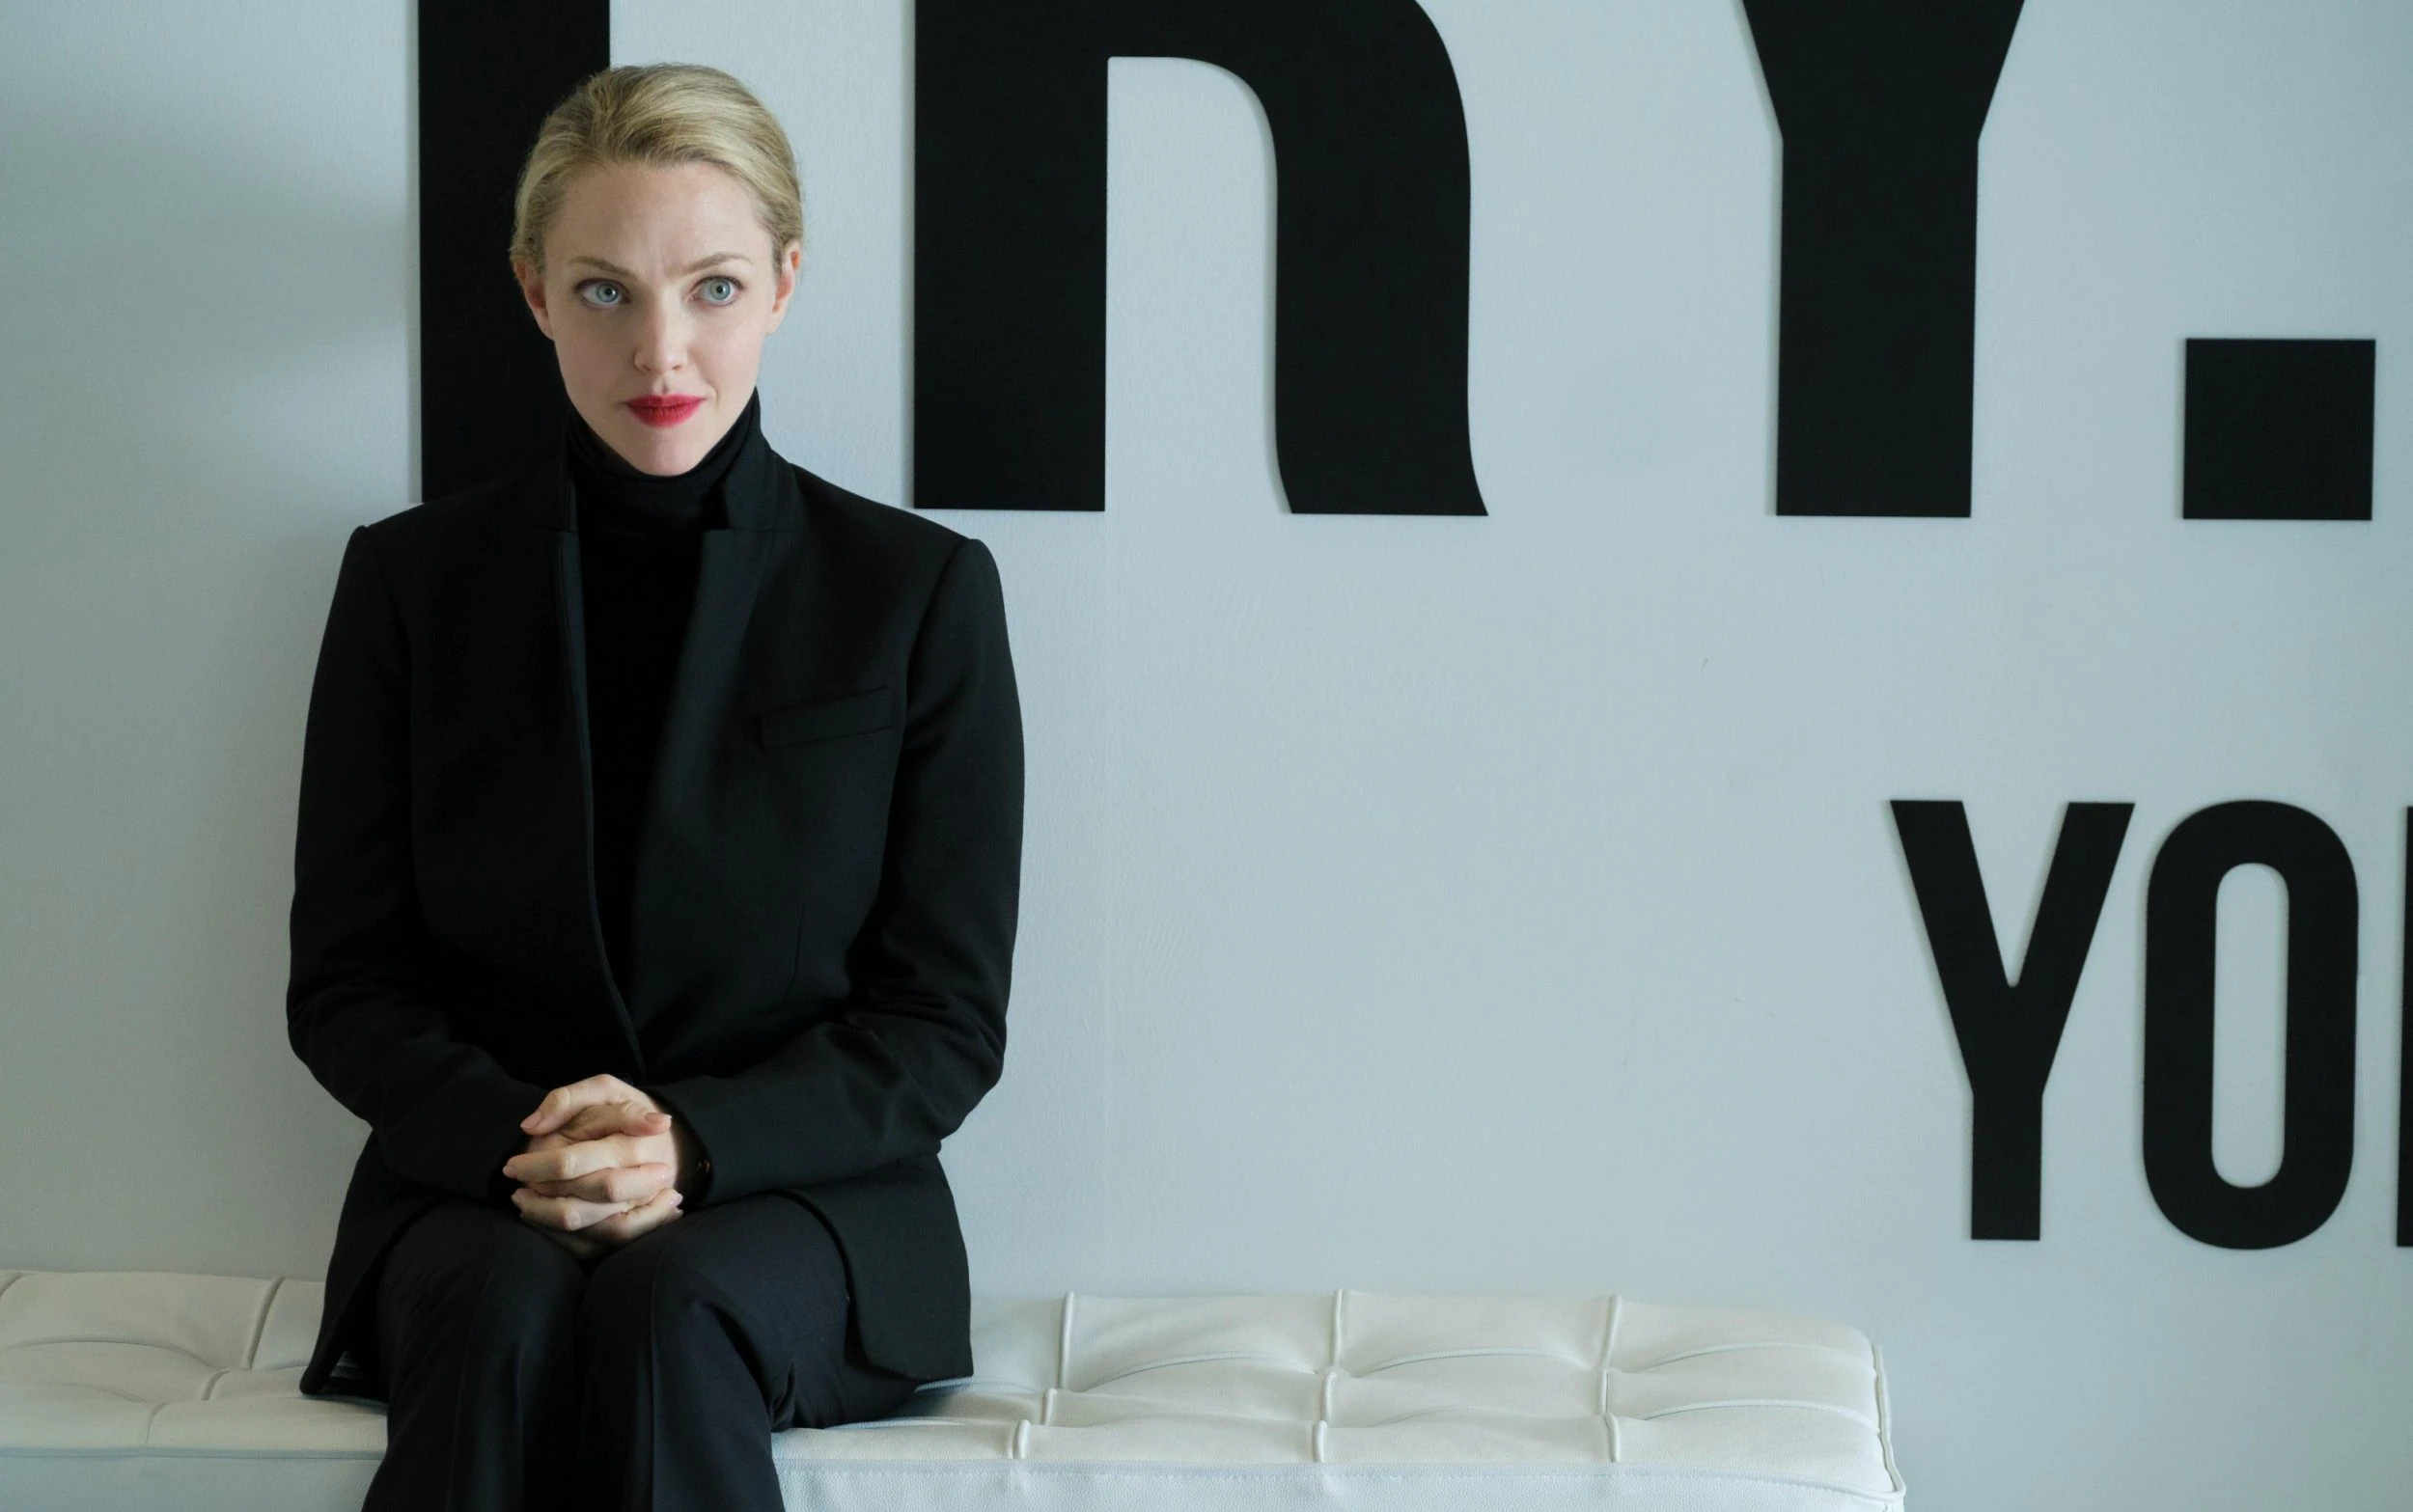 The Dropout: Understanding Elizabeth Holmes and the Theranos Scandal